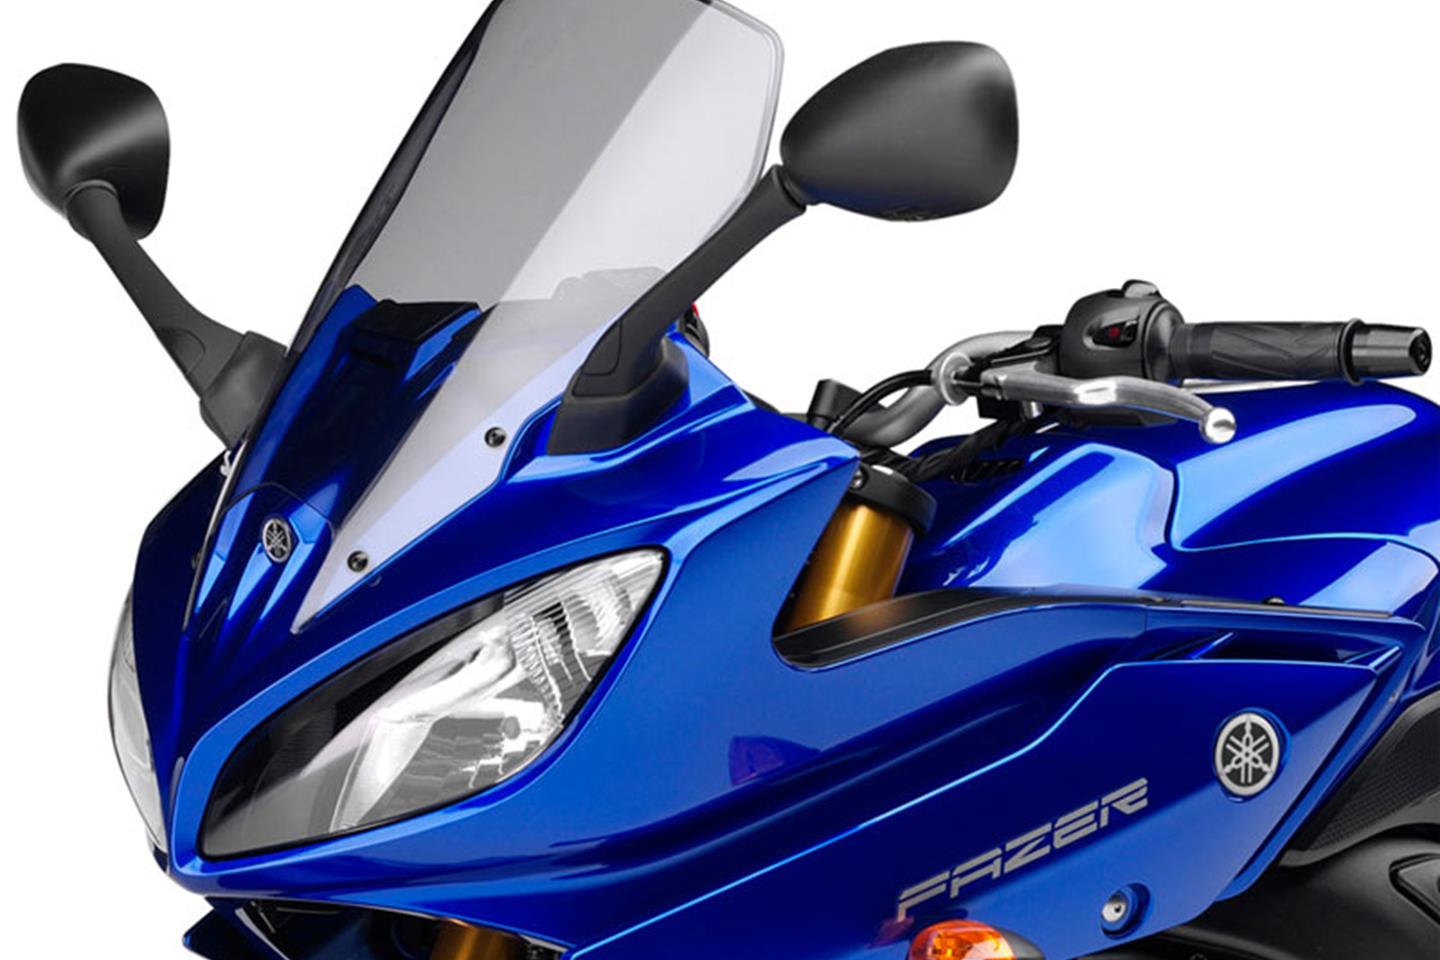 YAMAHA FAZER 8 (2010-on) Review | Speed, Specs & Prices